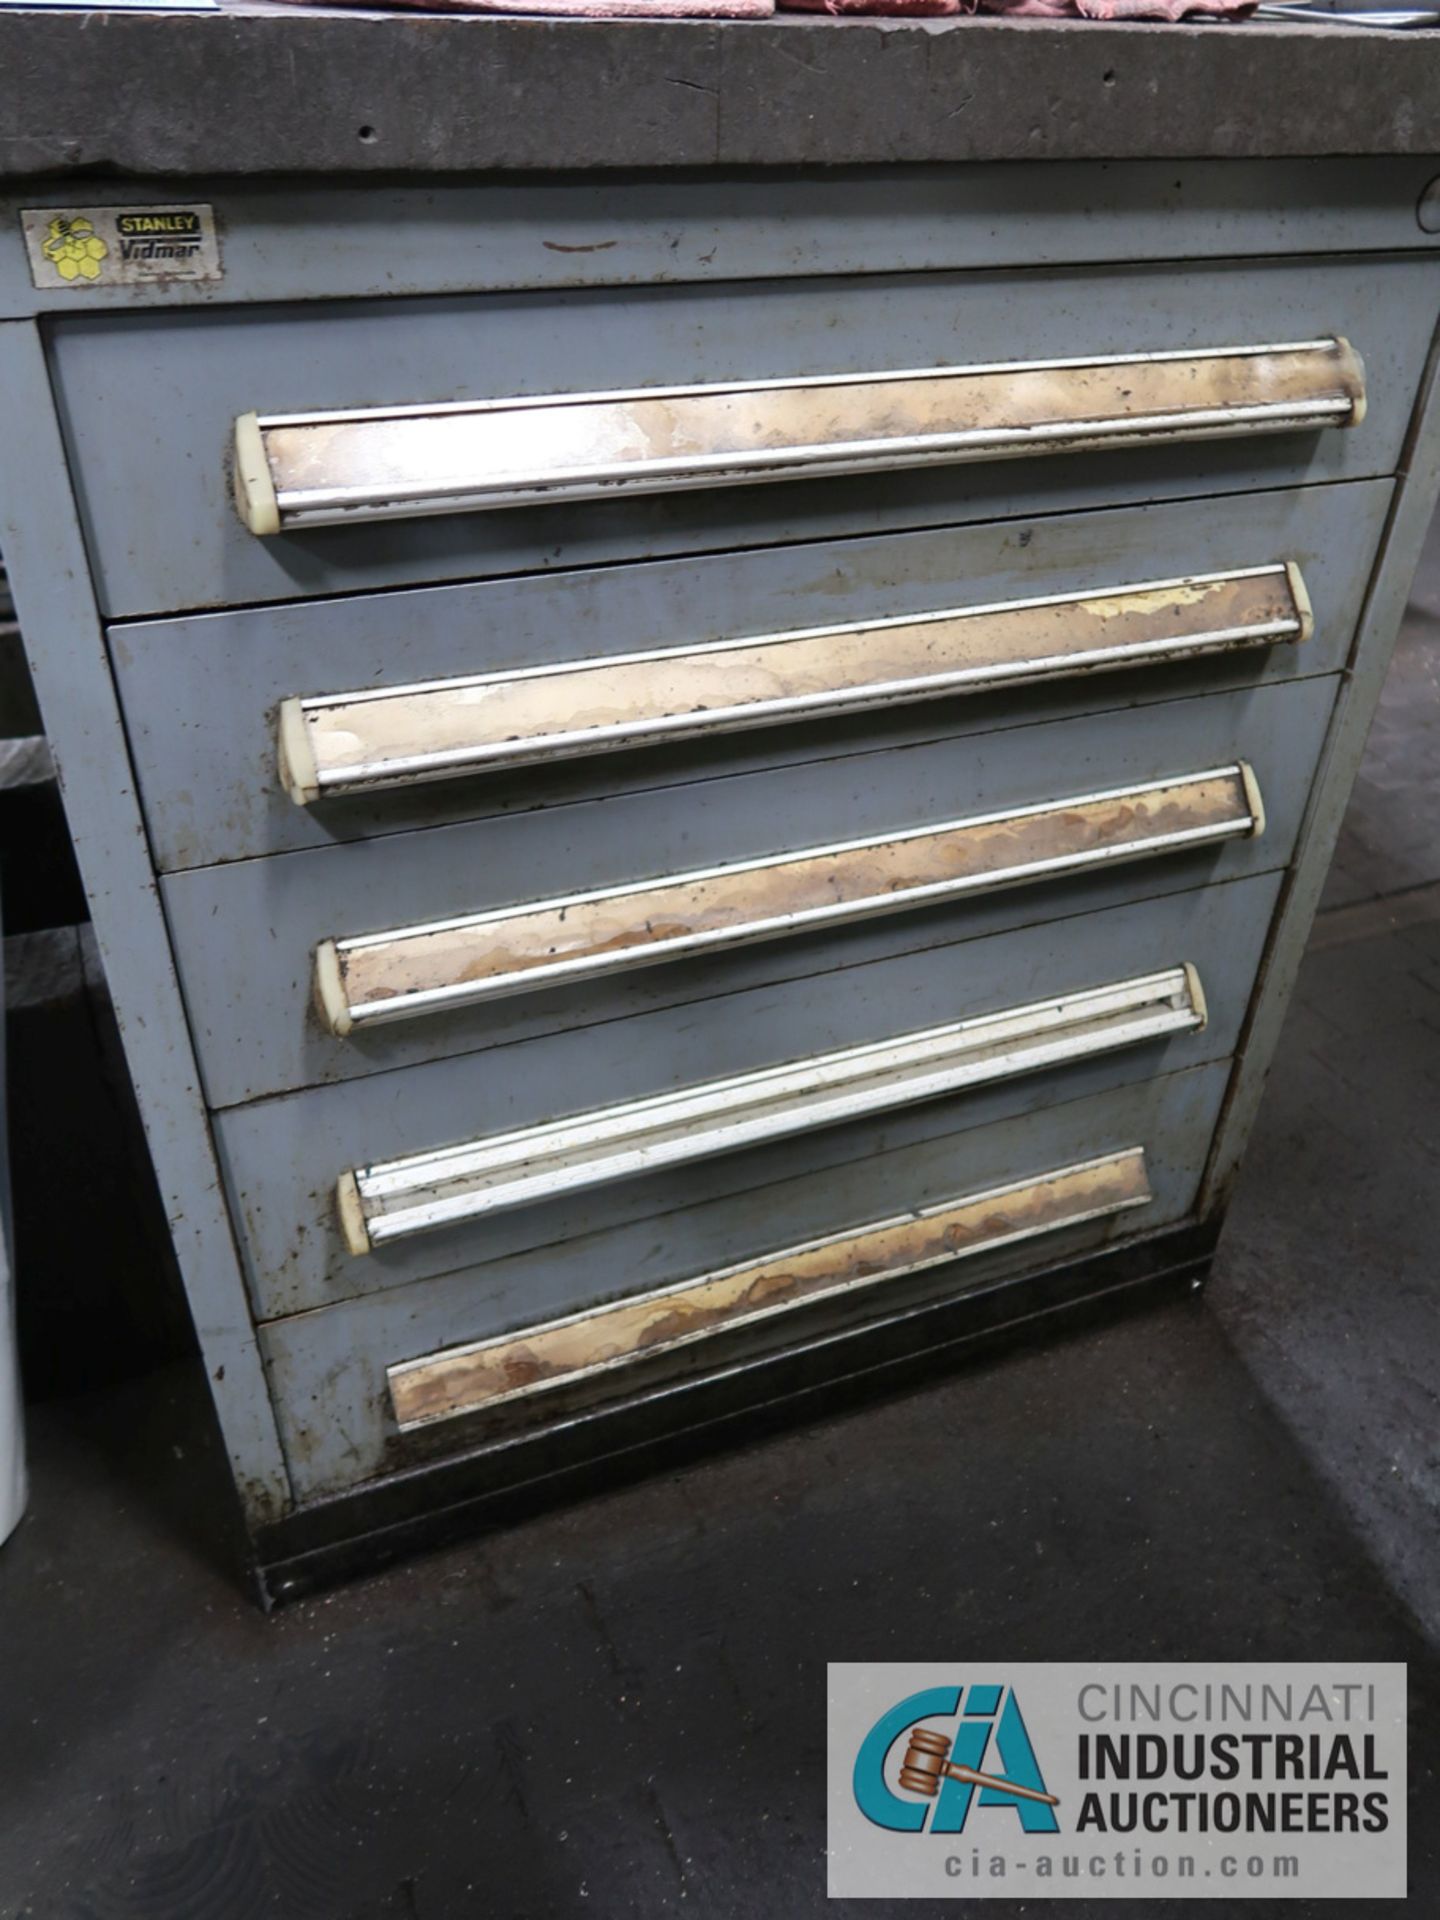 5-DRAWER VIDMAR CABINET WITH CONTENTS, INSPECTION